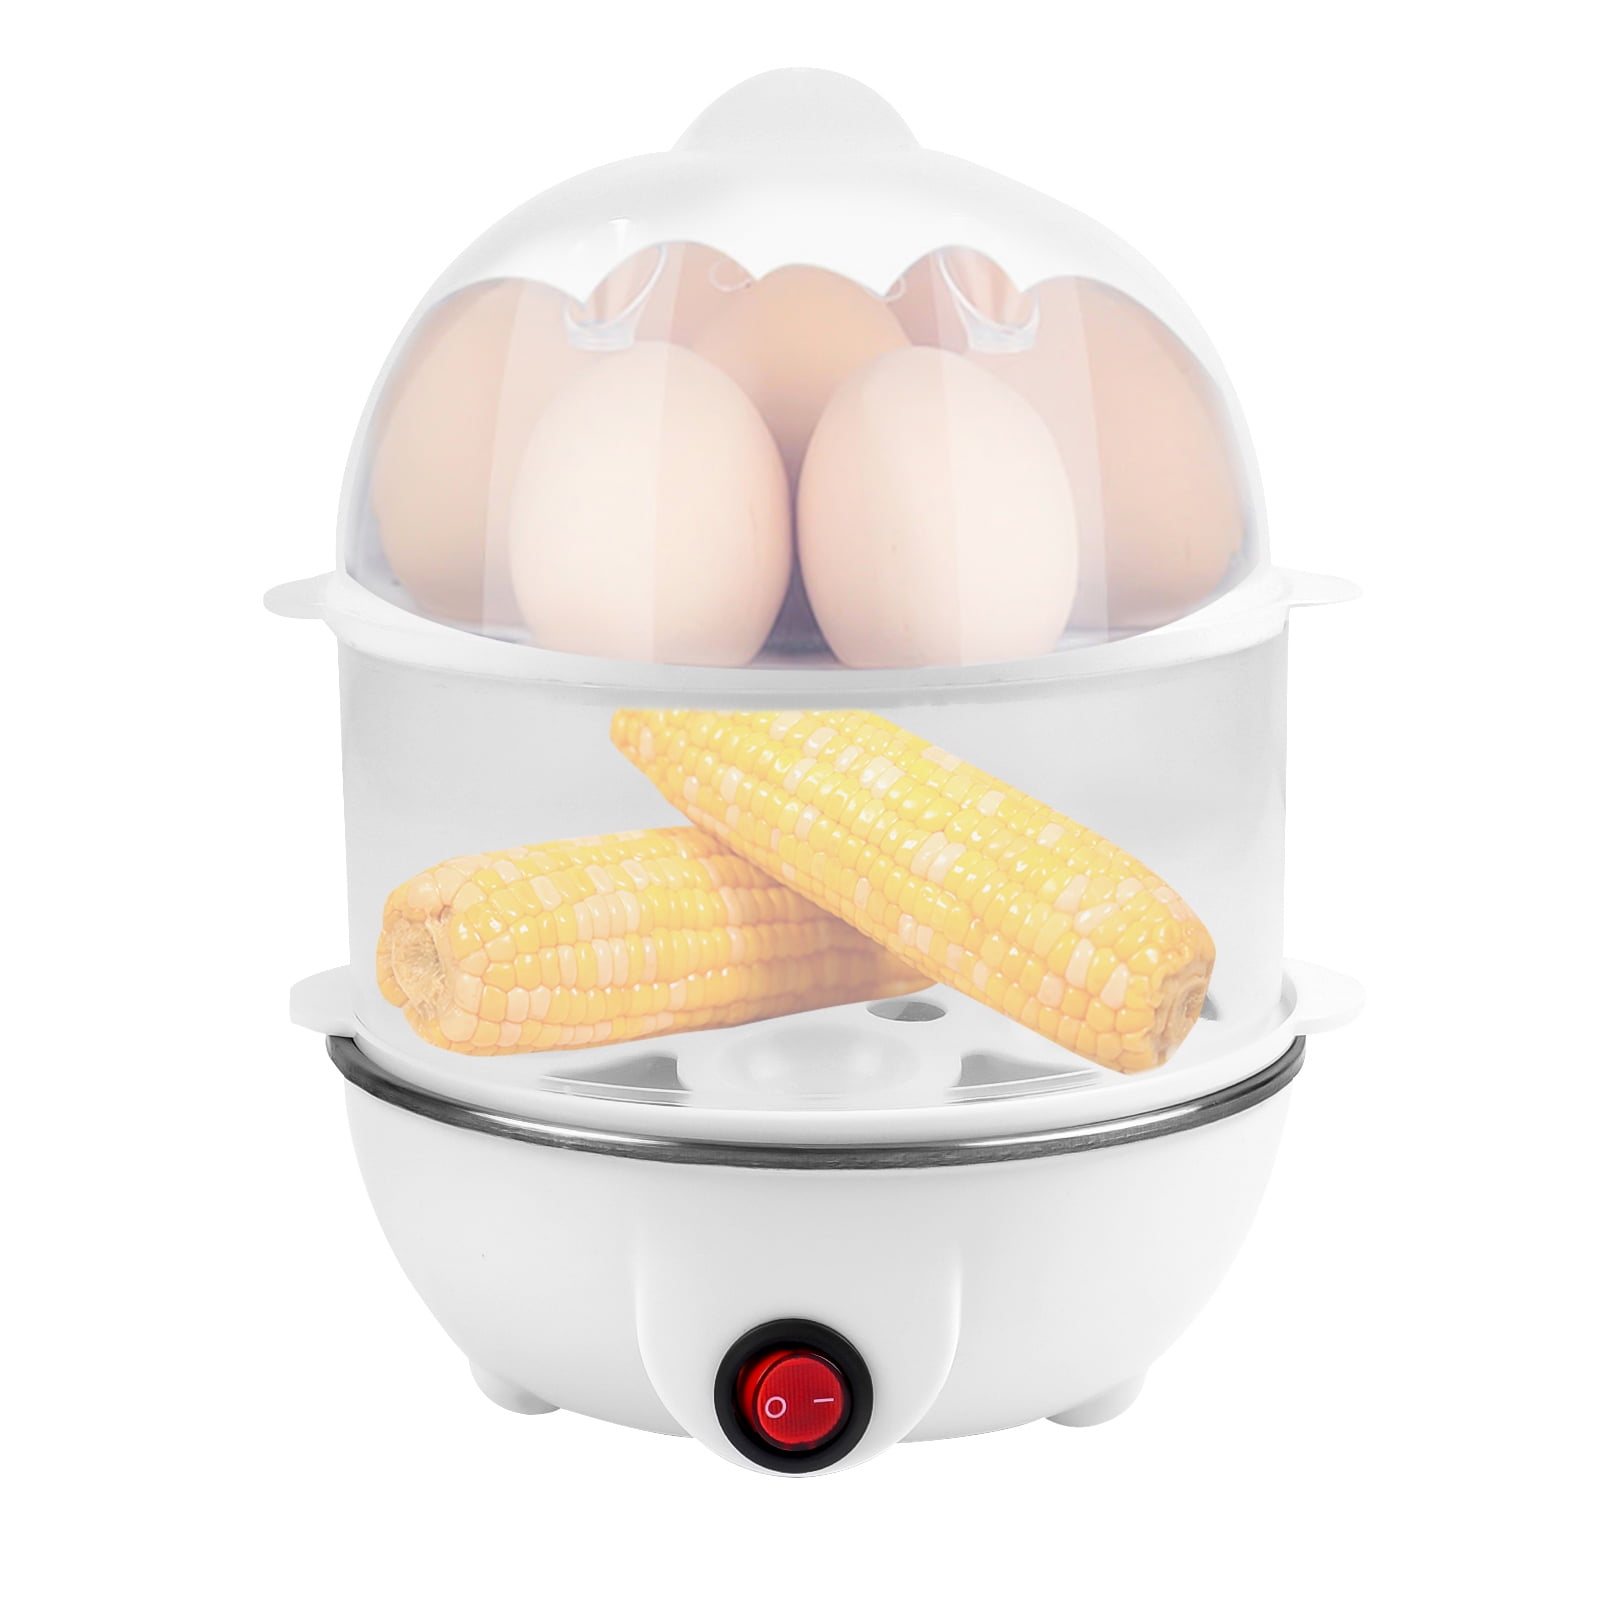 OXO Good Grips Microwave Egg Cooker in Red/White 